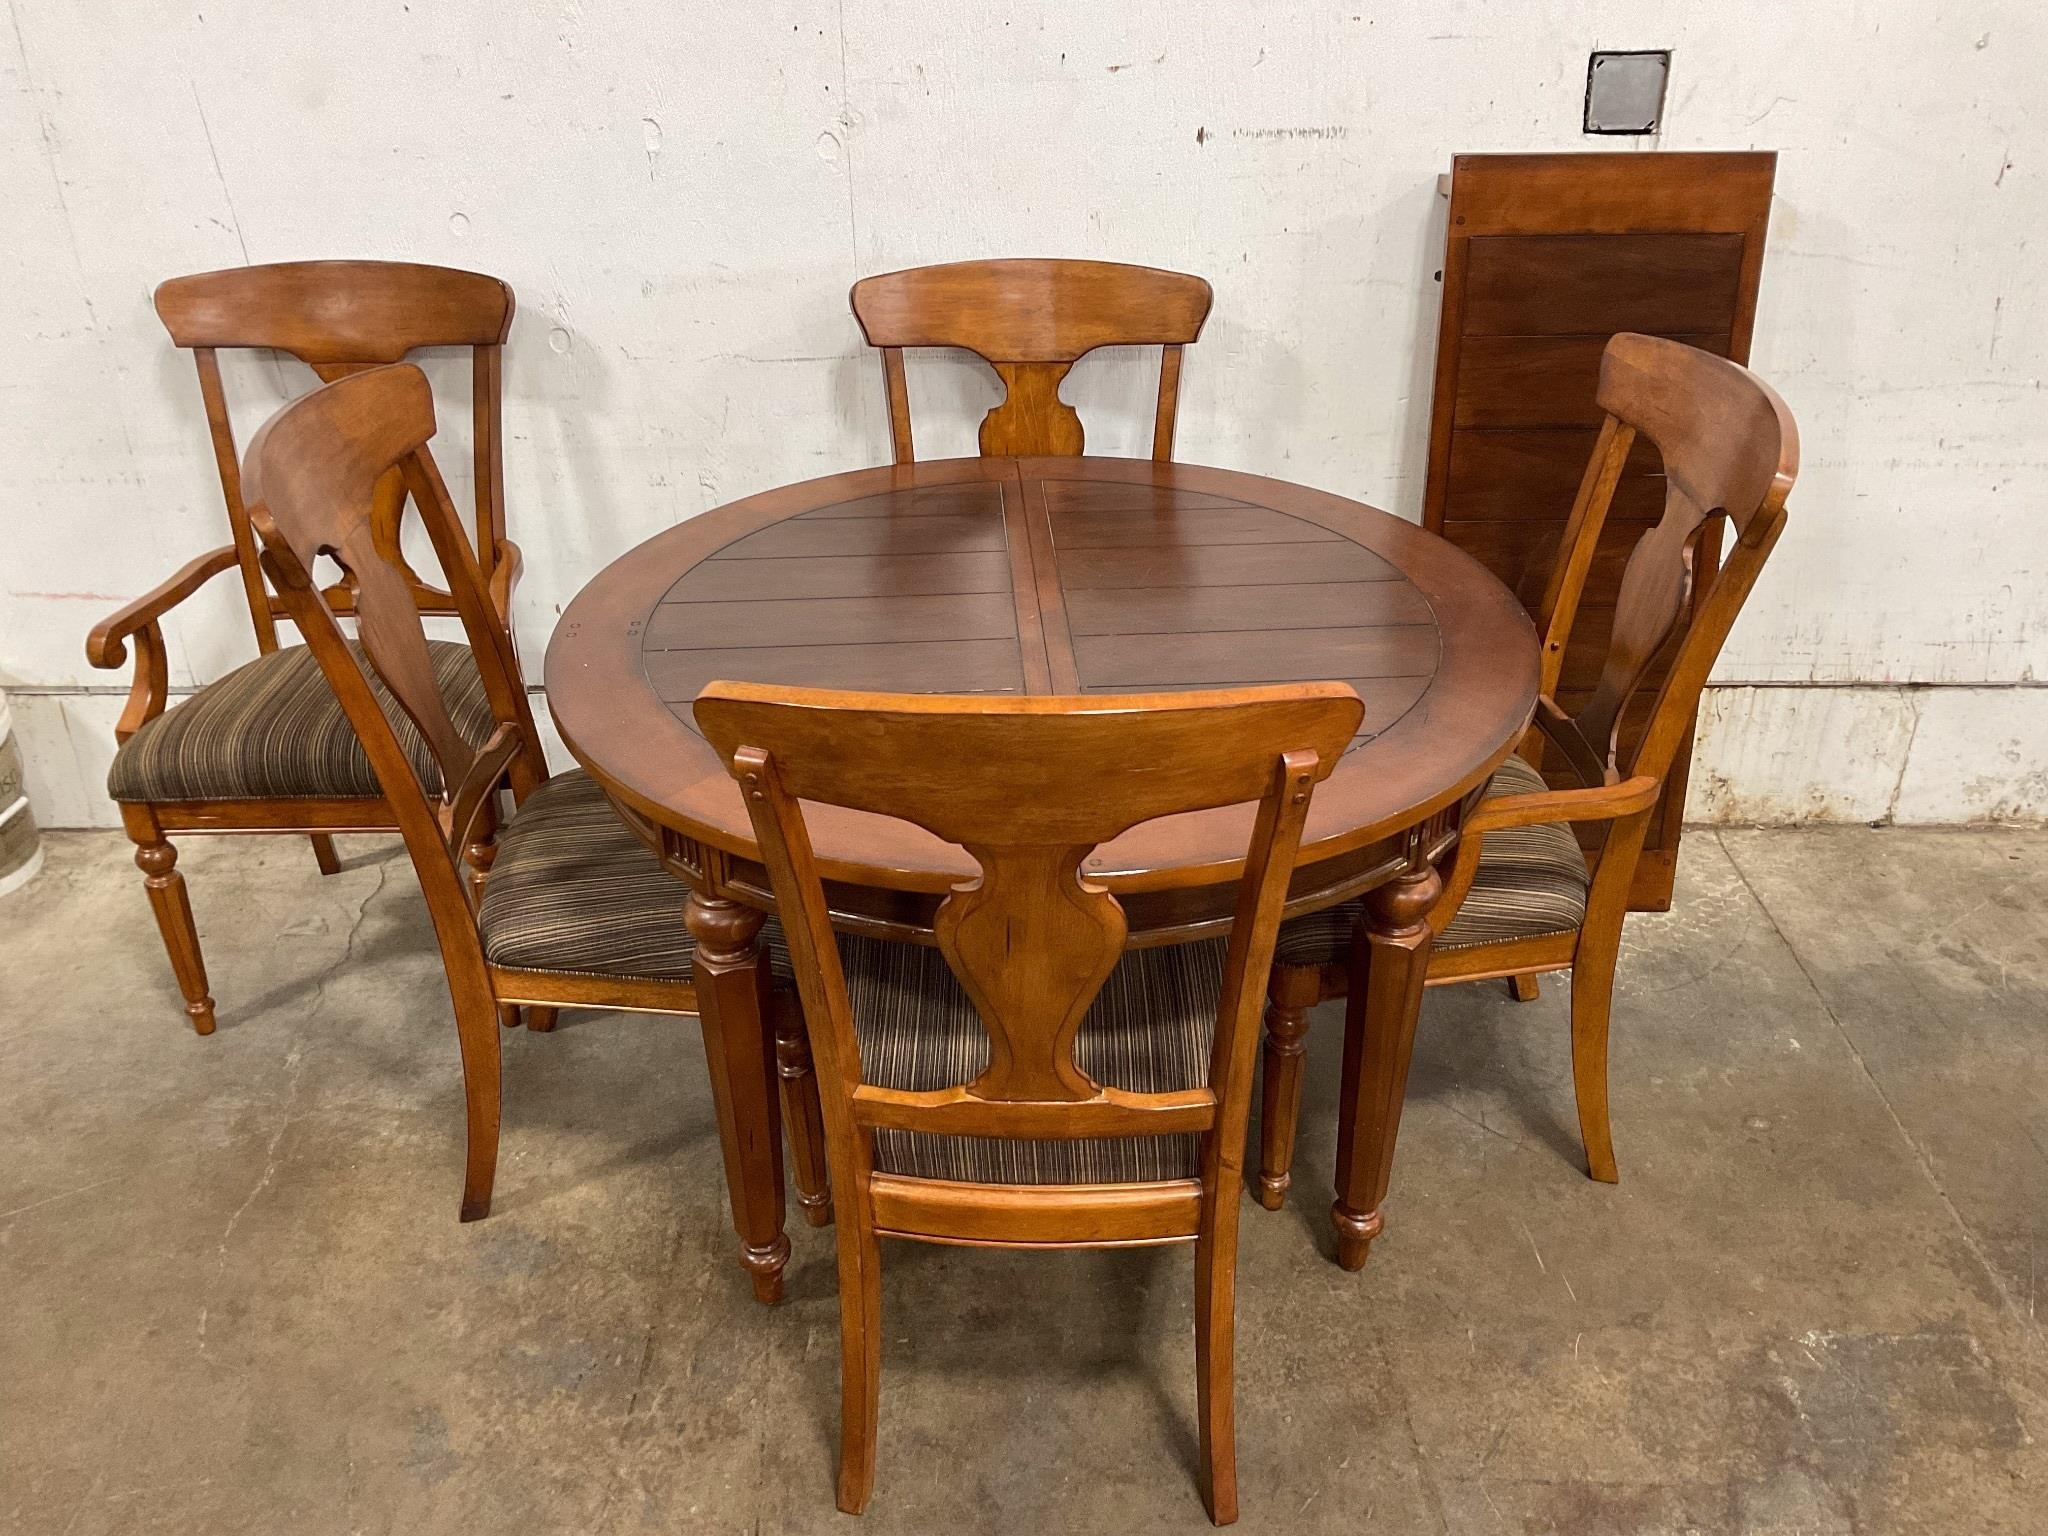 Dining Room Table w/ Chairs